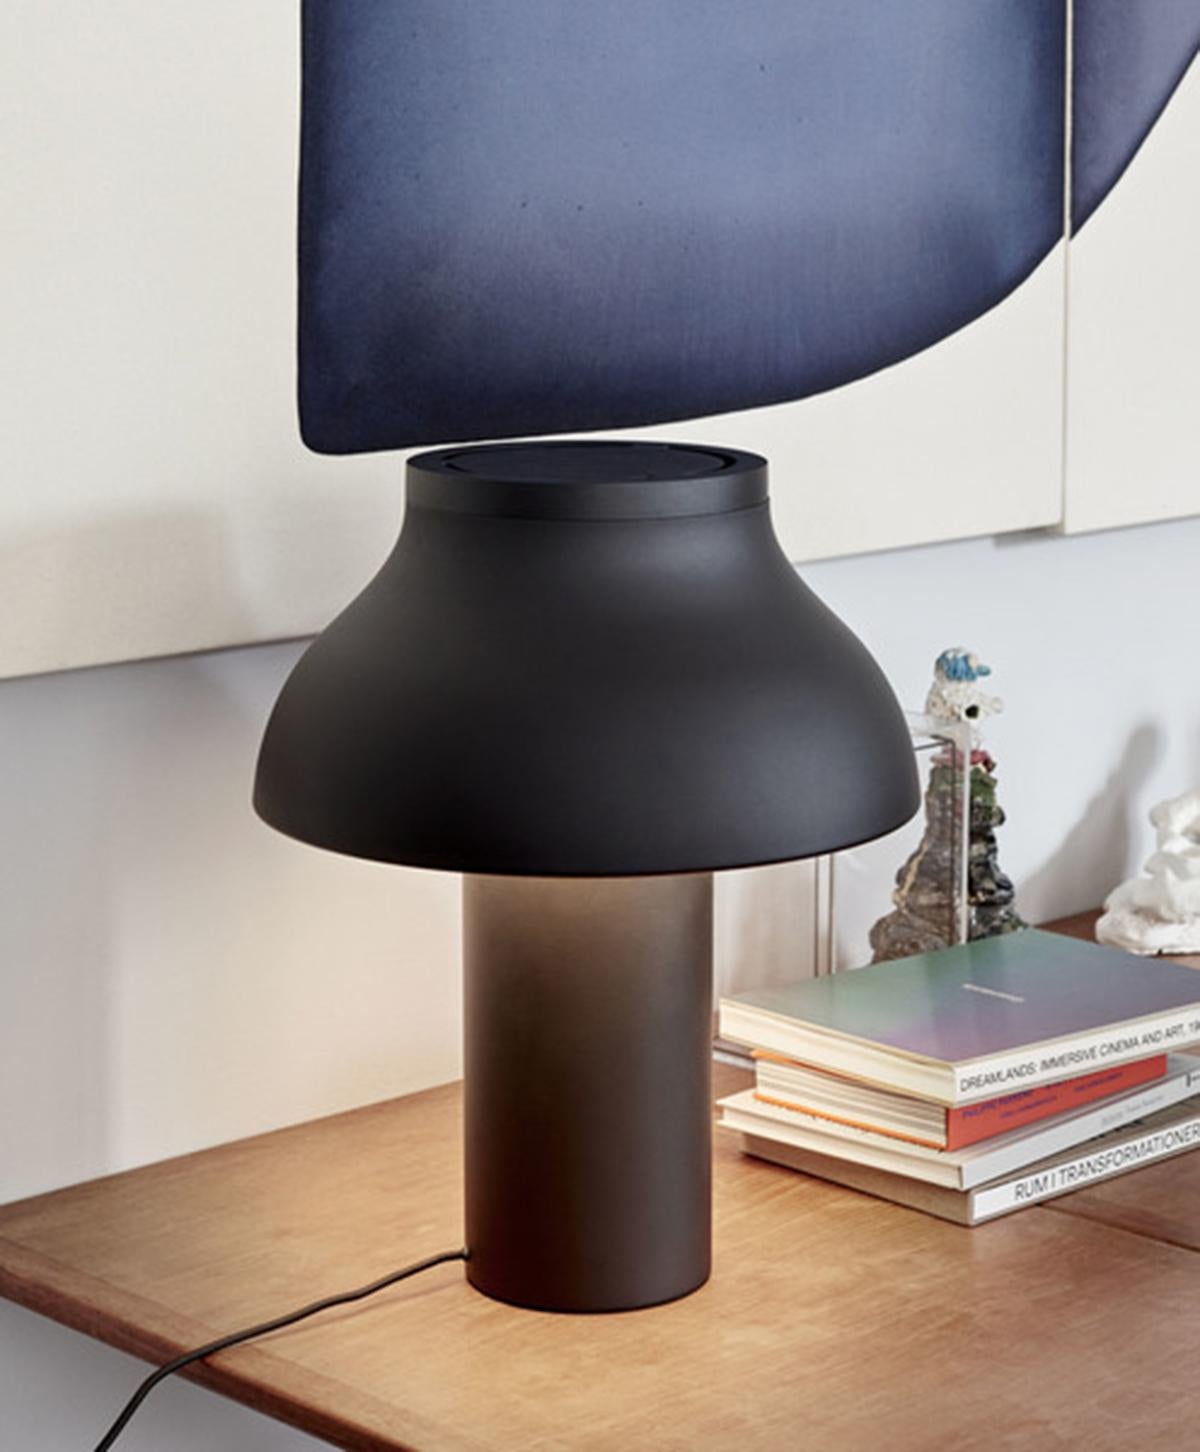 Pierre Charpin’s PC table lamps is a refined freestanding tabletop lamps. The lamp is constructed in anodised aluminium, which makes the surface more resistant to corrosion. The light source is hidden from view by a removable polycarbonate moulded